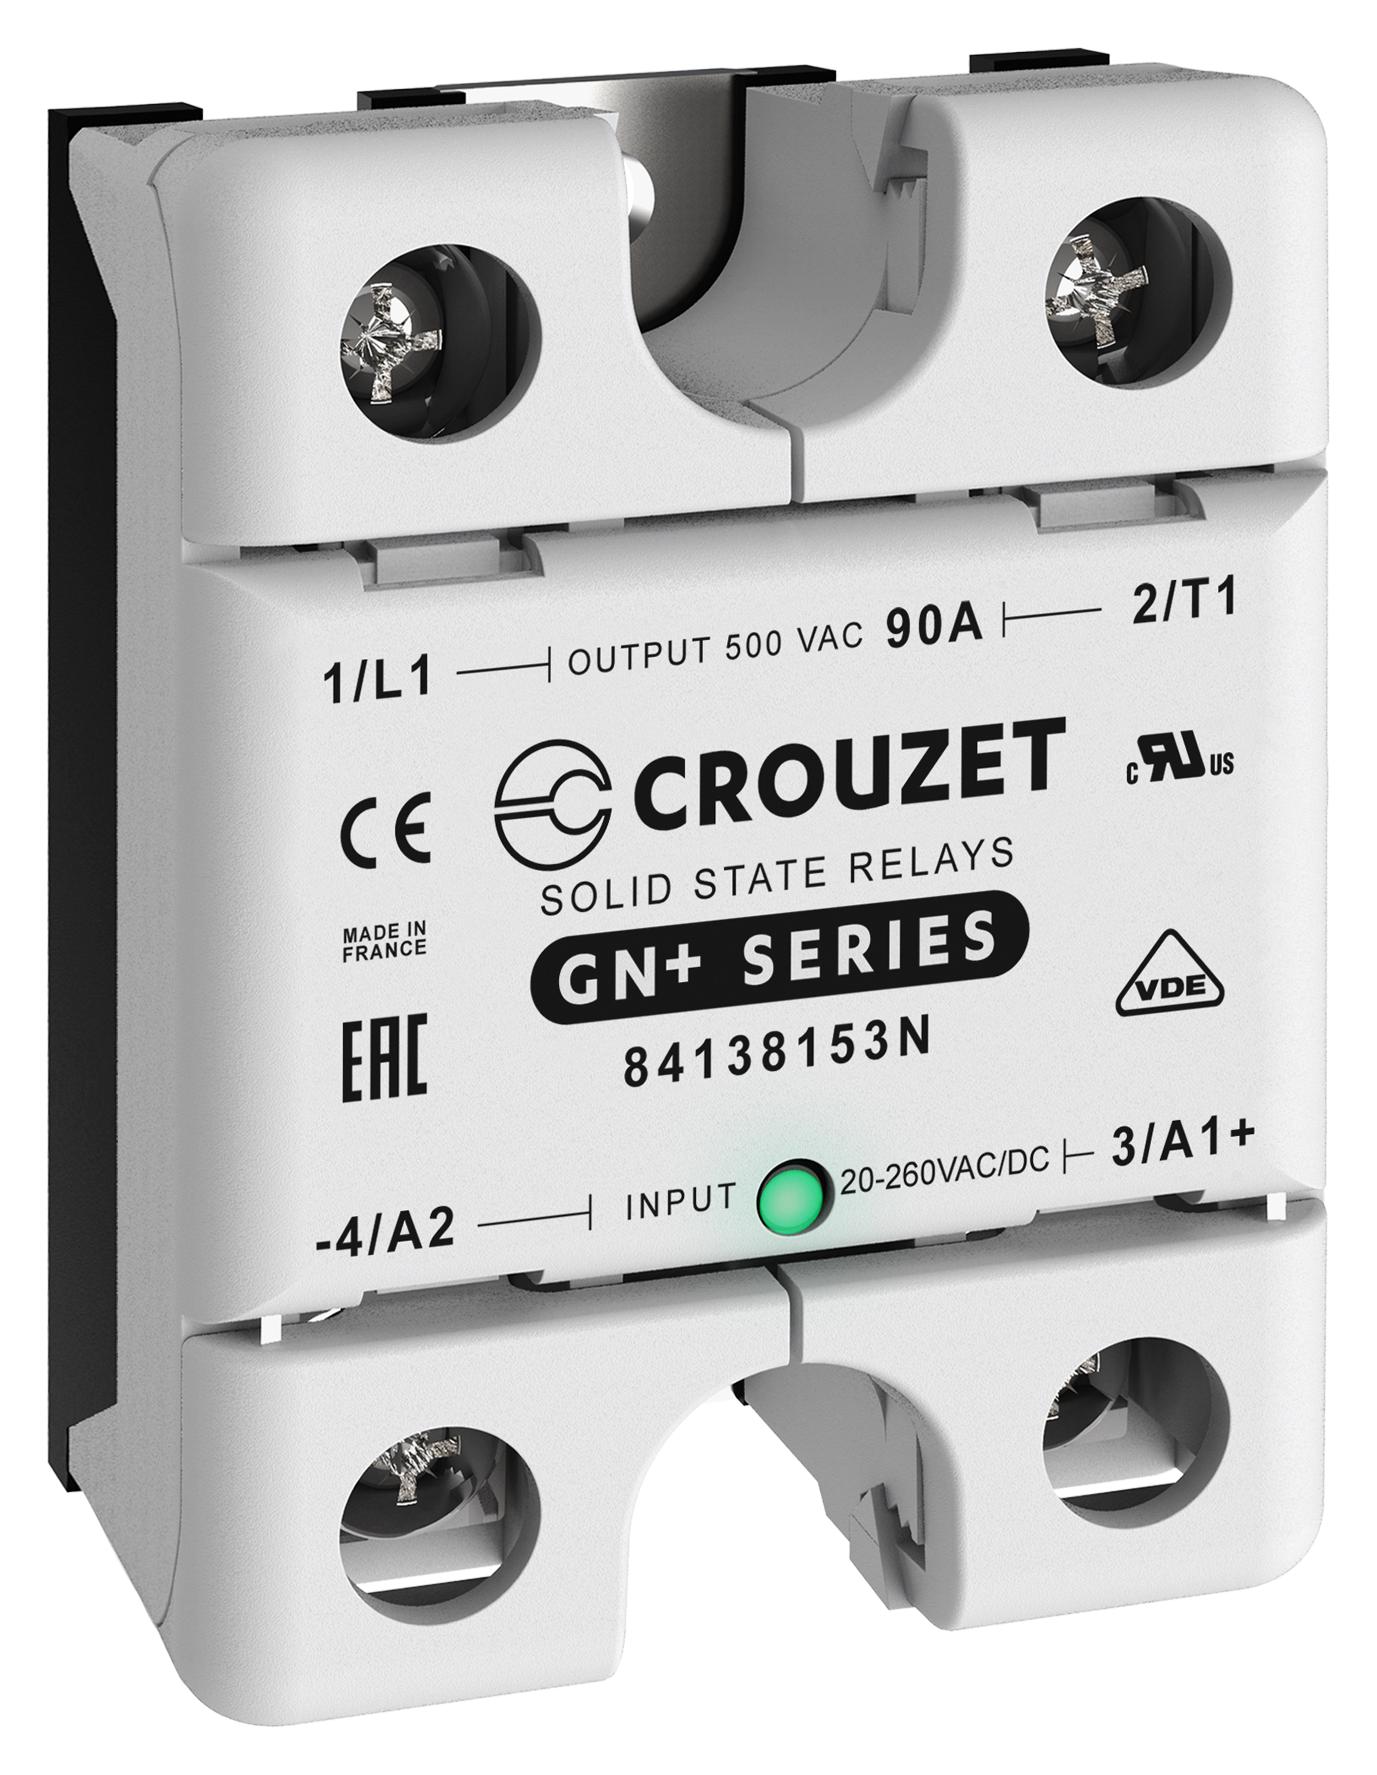 84138153N SOLID STATE RELAY, 90A, 24-500VAC, PANEL CROUZET